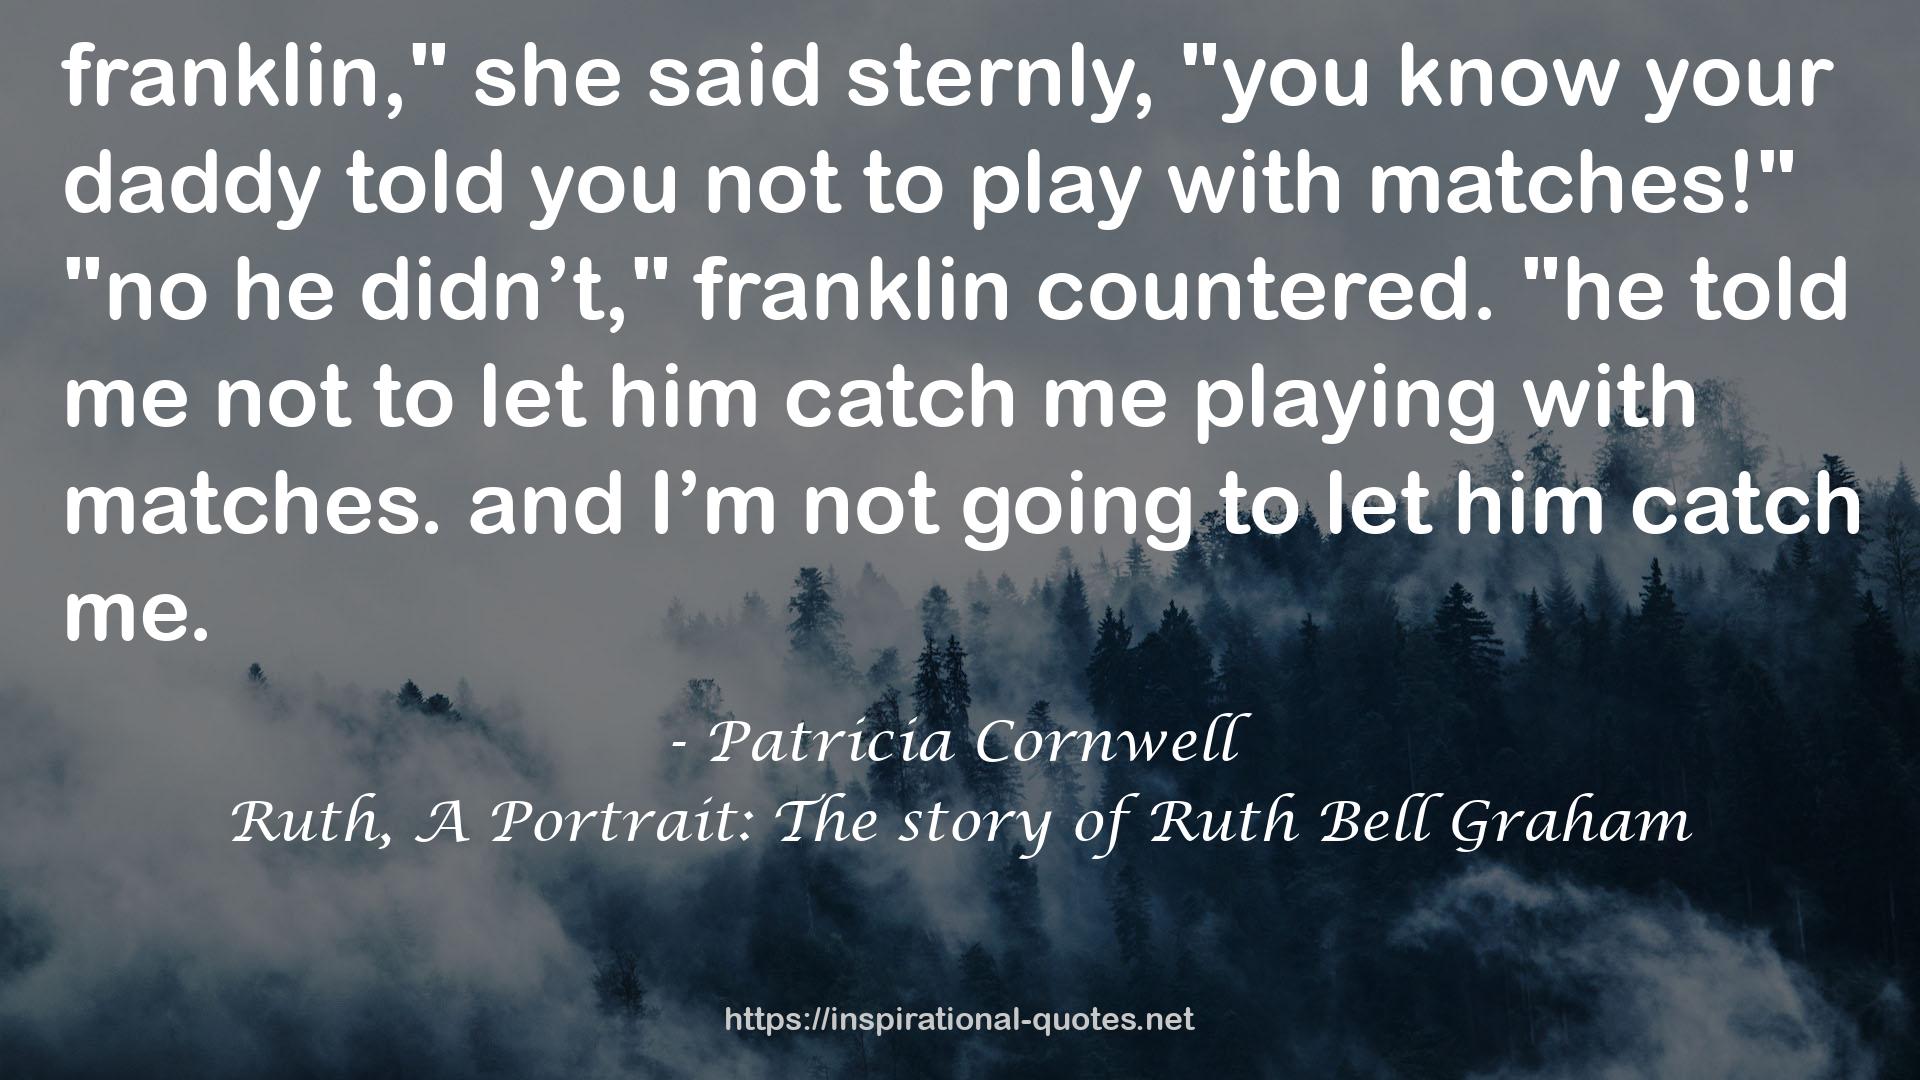 Ruth, A Portrait: The story of Ruth Bell Graham QUOTES